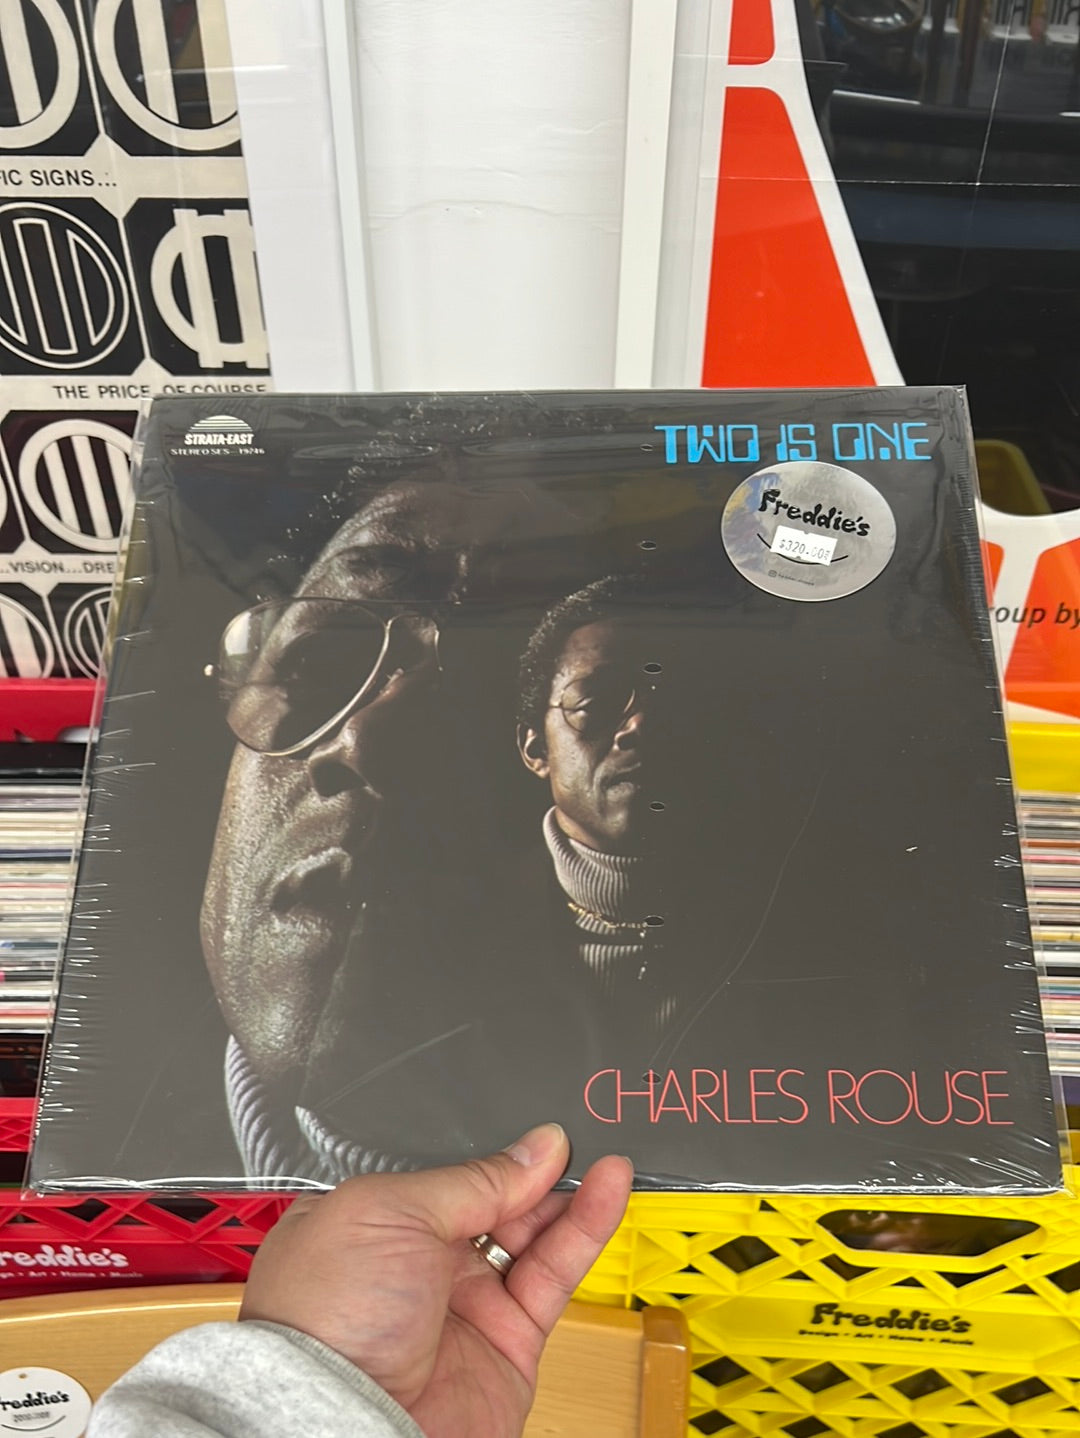 Charles Rouse - Two is one SES 19746 Blue label 1982 SEALED